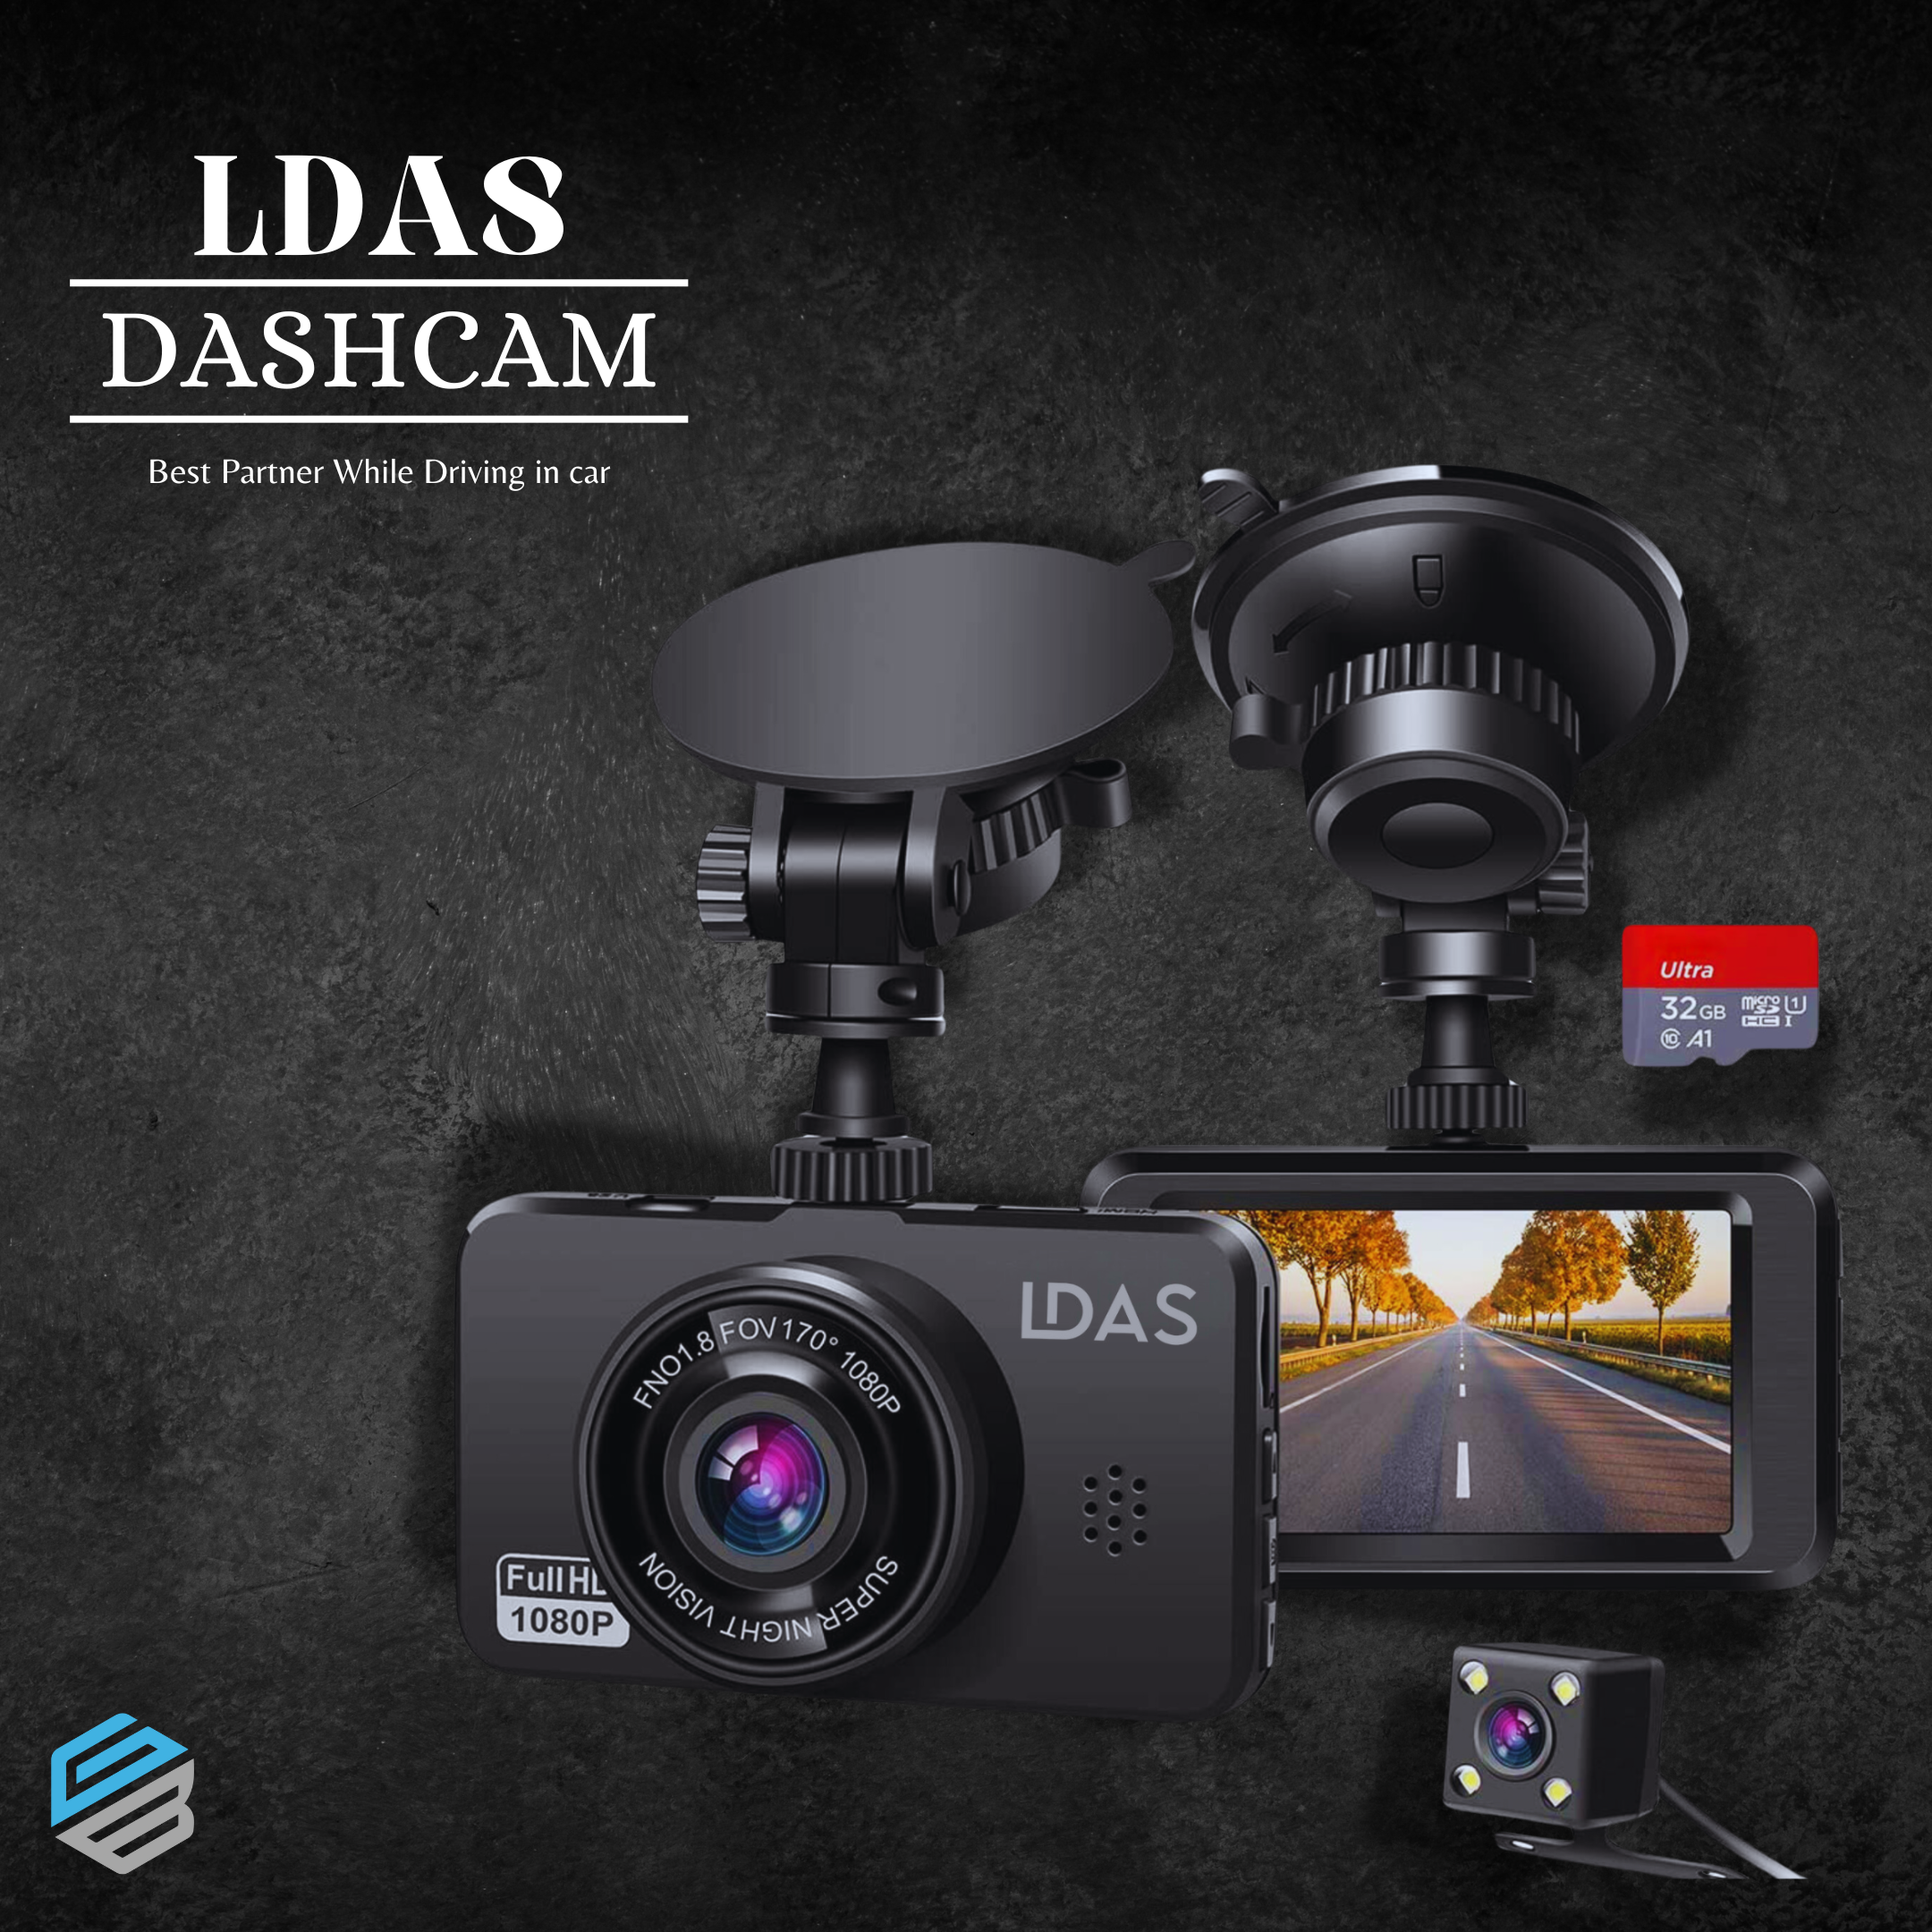 LDAS DASHCAM FOR CARS WITH BACK AND FRONT CAM WITH THIS A SD CARD FOR STORAGE